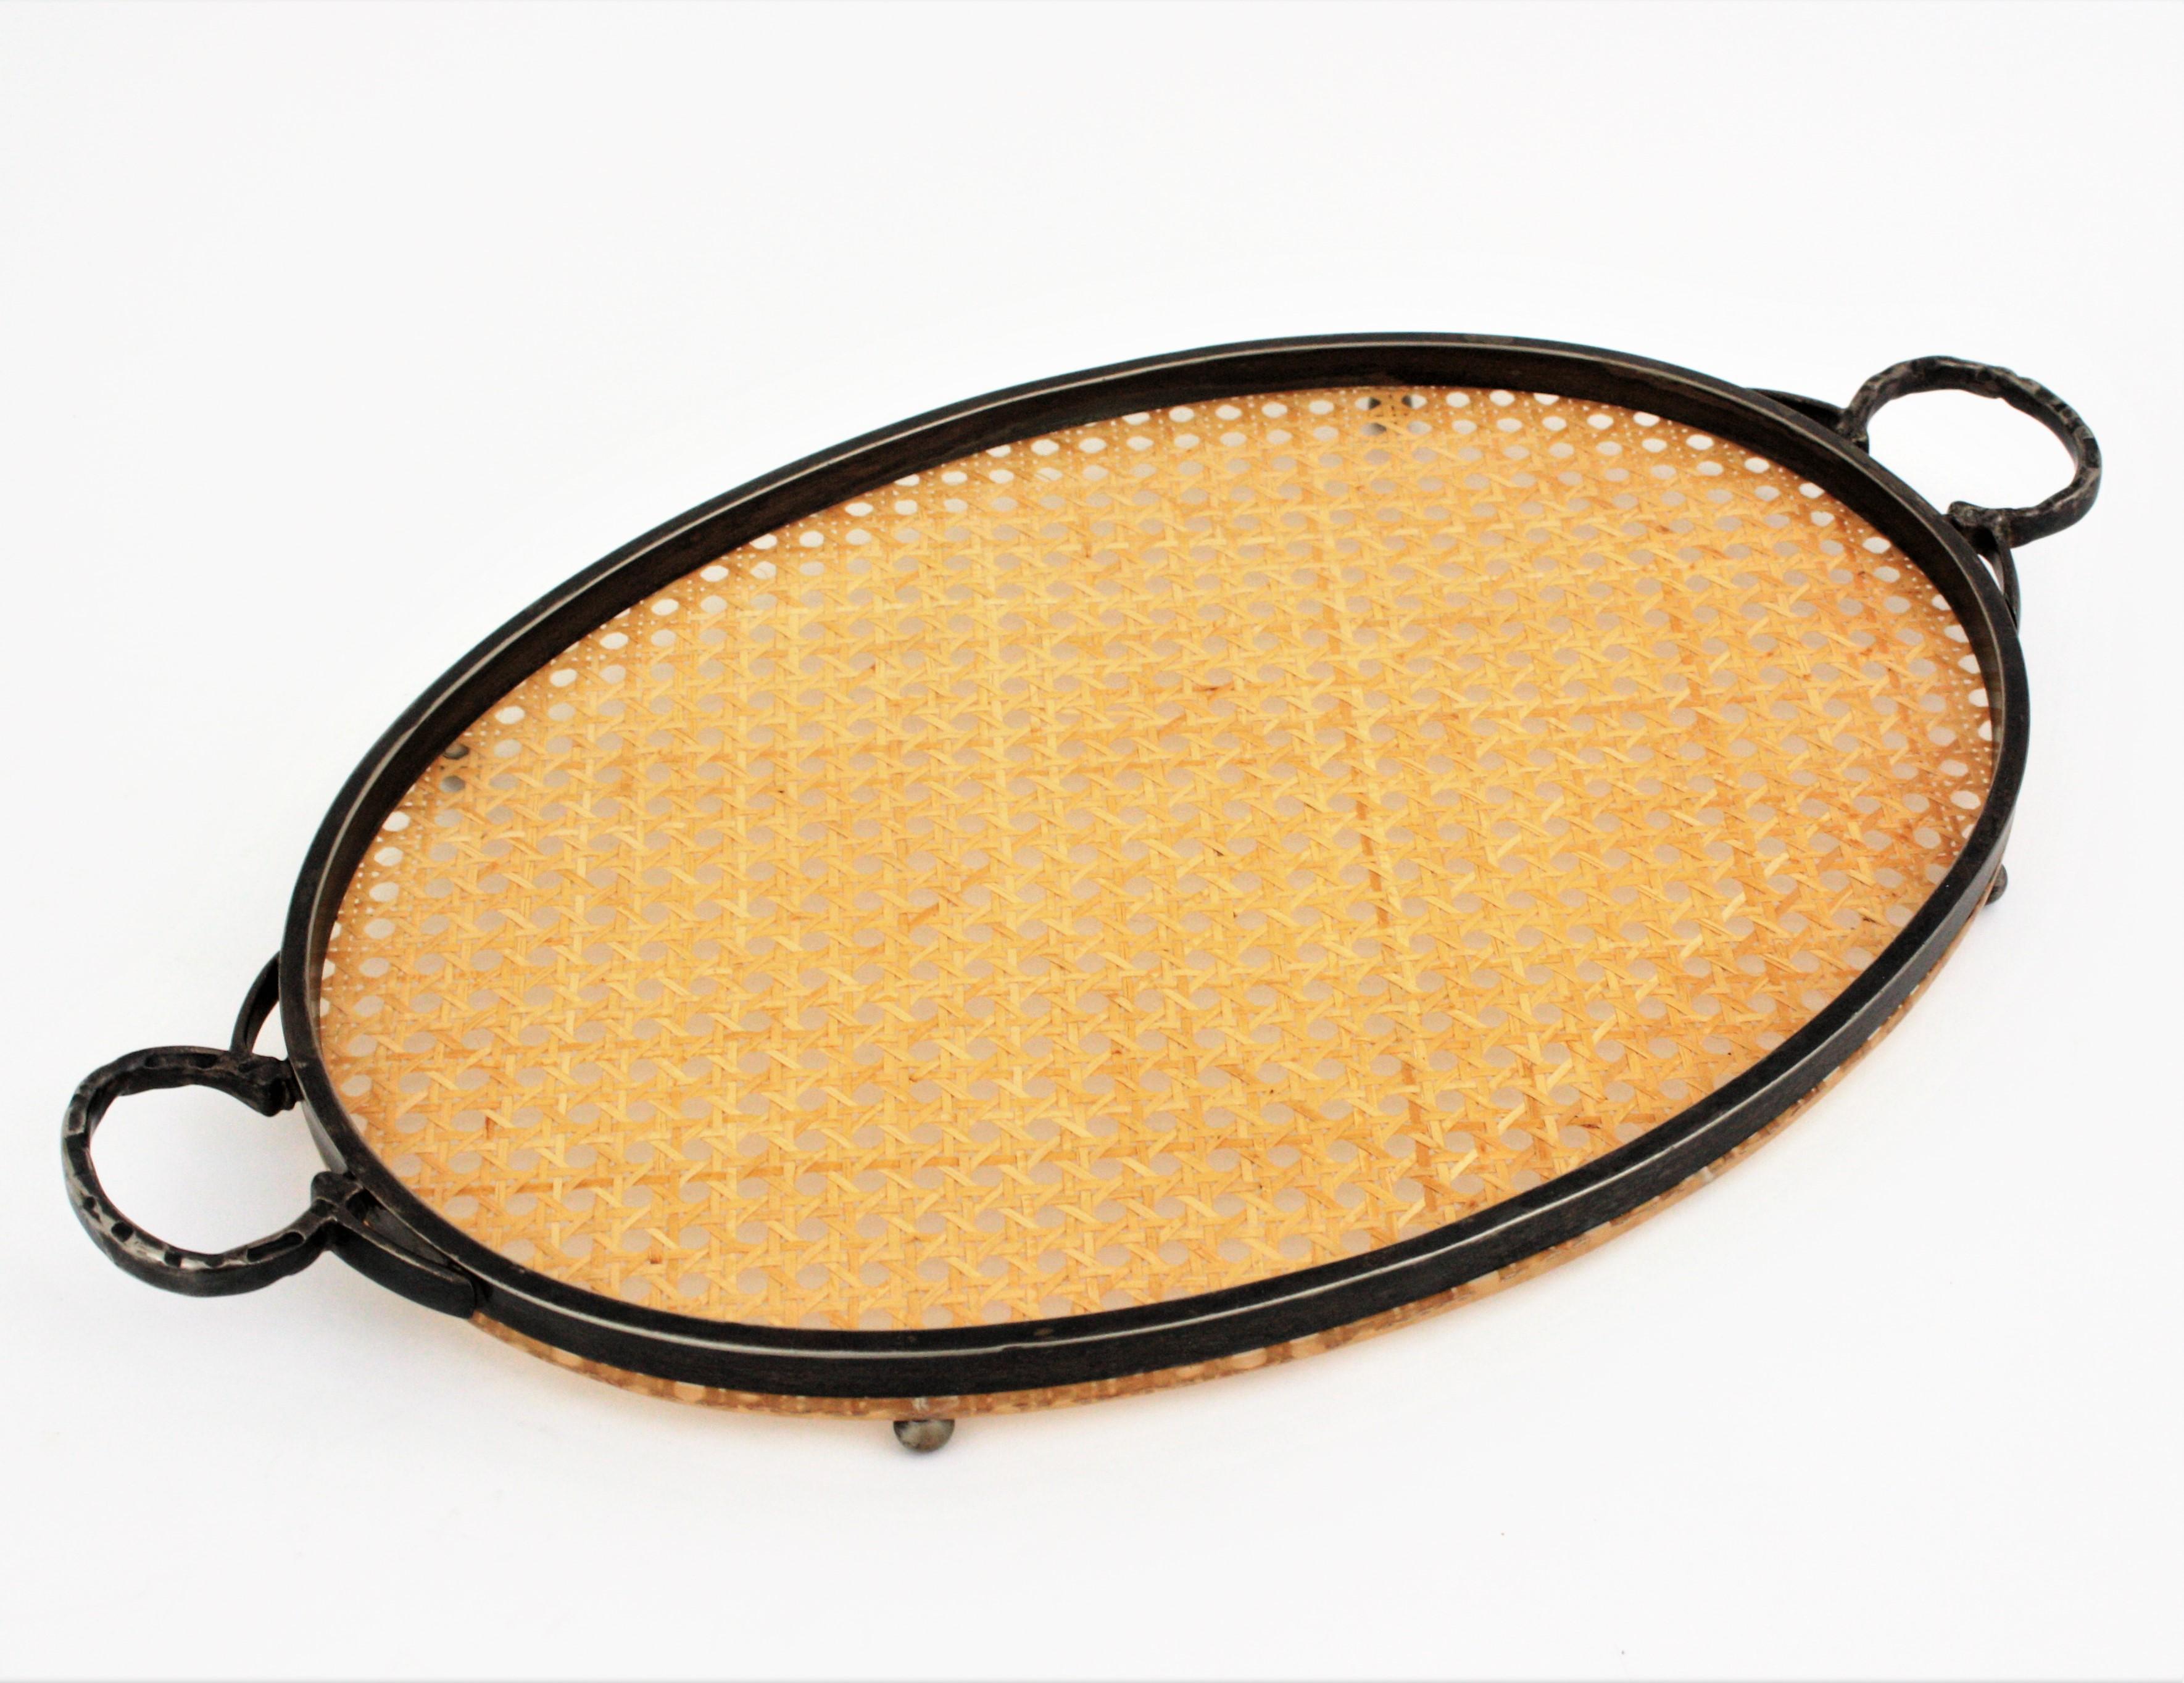 Christian Dior Style Oval Serving Tray in Rattan, Lucite & Metal 2